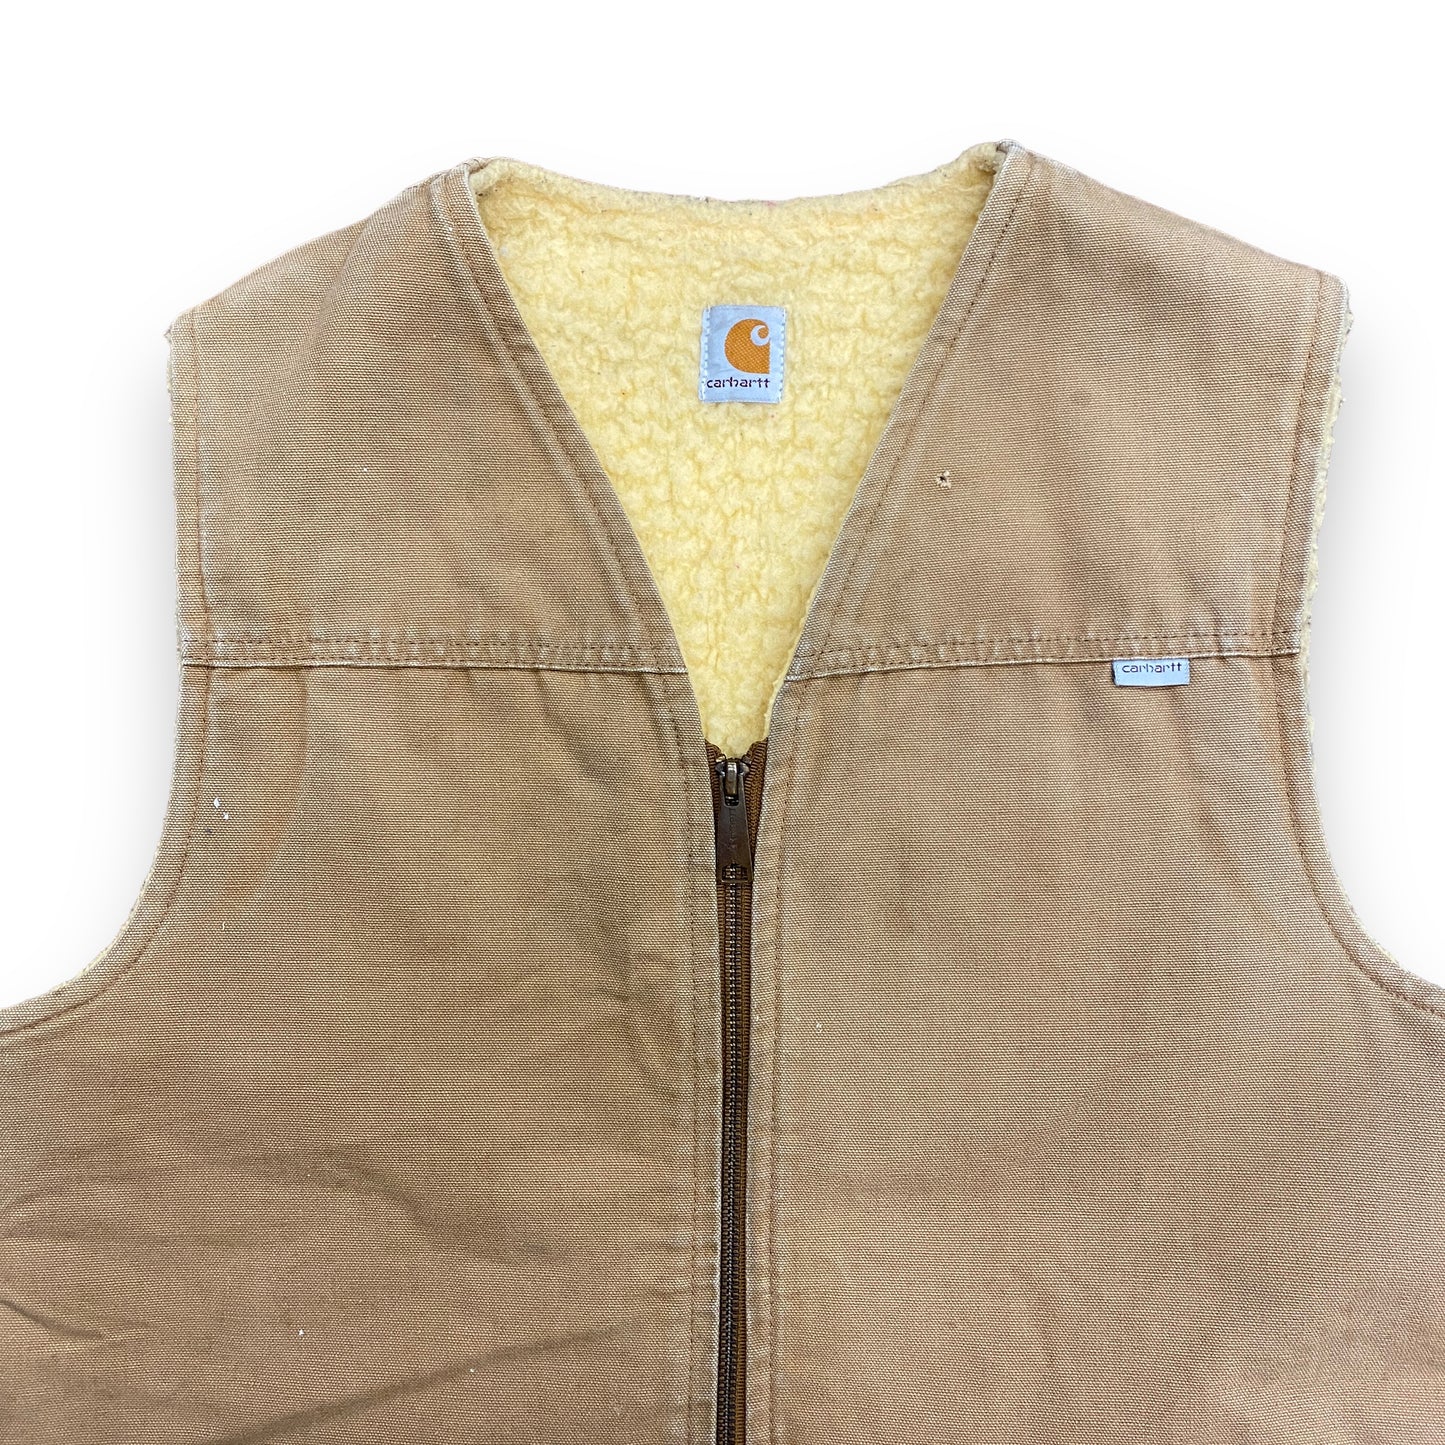 1980s Union Made Carhartt Sherpa Lined Vest - Size Medium